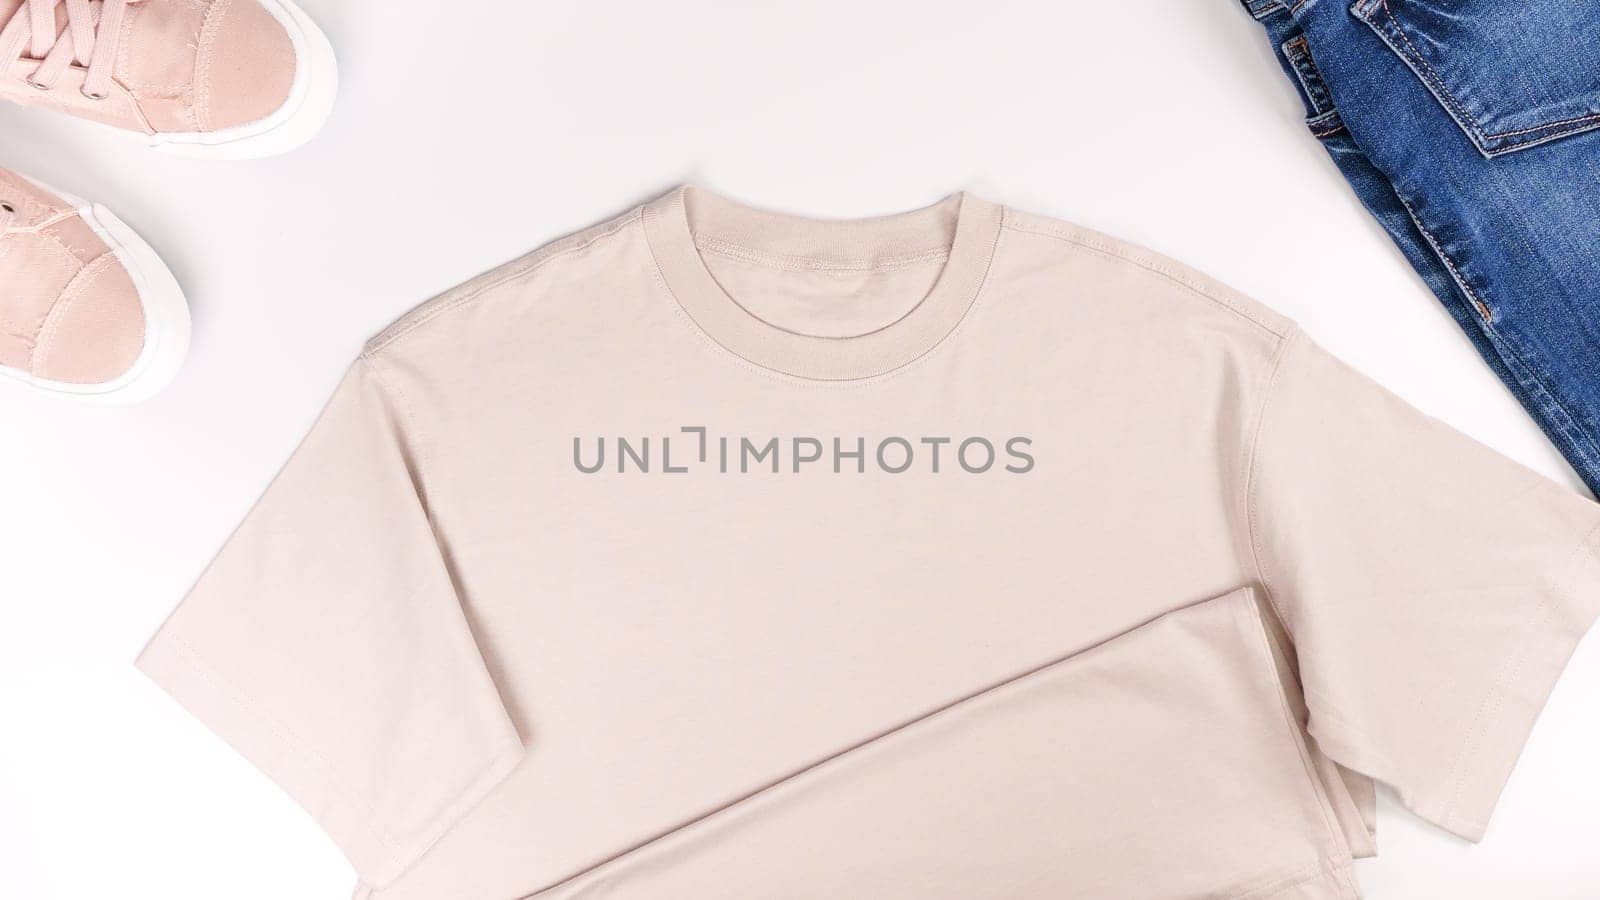 Beige unisex t shirt mock up flat lay on white background. Top front view t-shirt, snikers, jeans and copy space. Mockup t-shirt and summertime. Template blank shirt